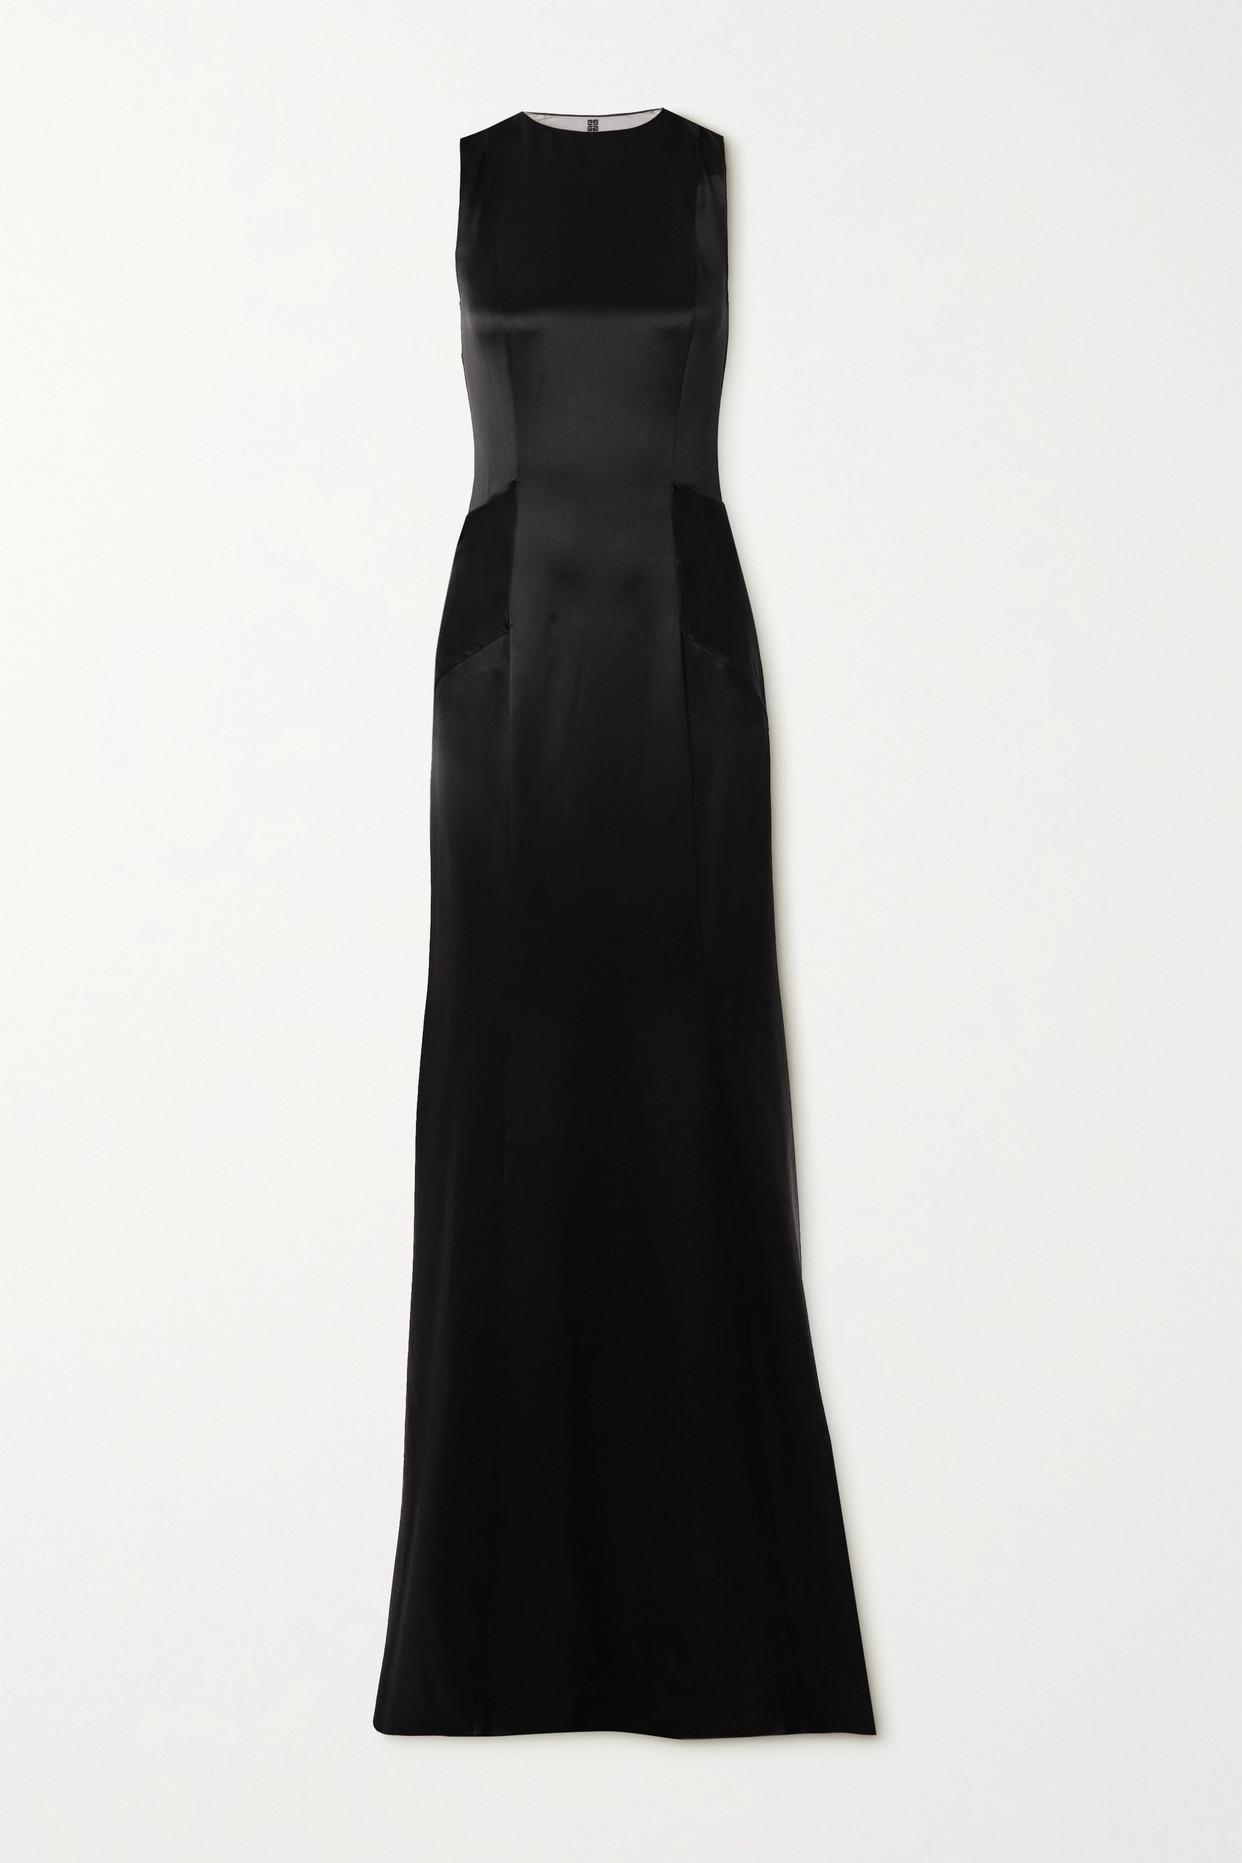 Givenchy Paneled Tulle And Draped Silk-satin Gown in Black | Lyst